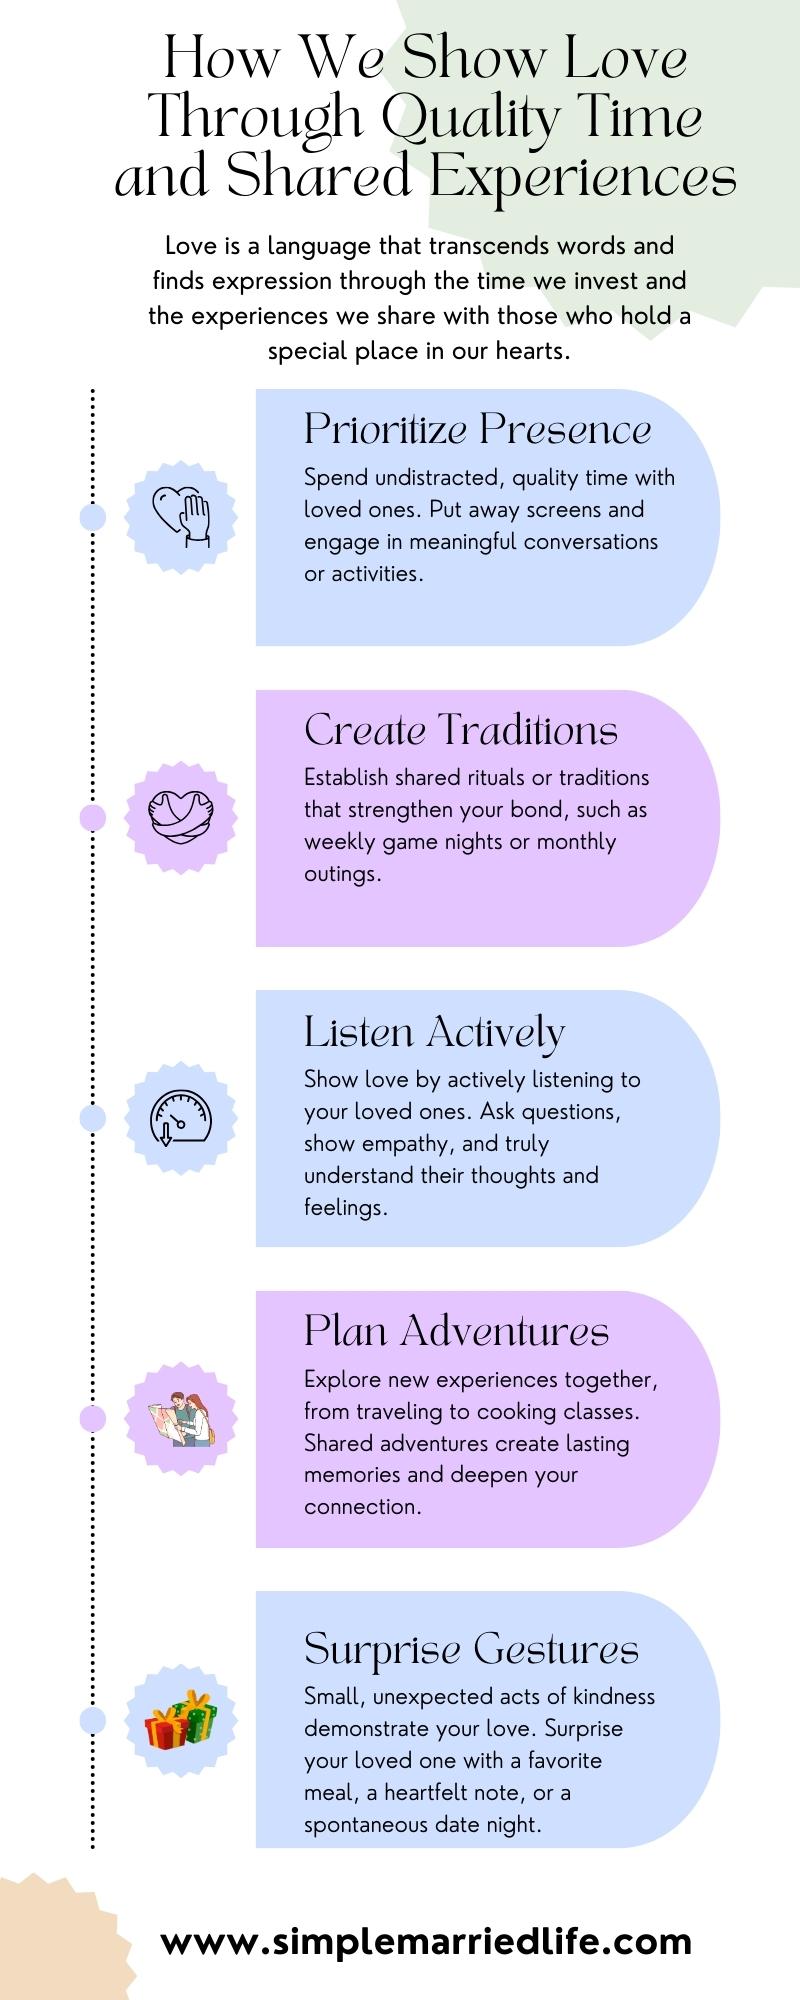 couple quality time tips infographic